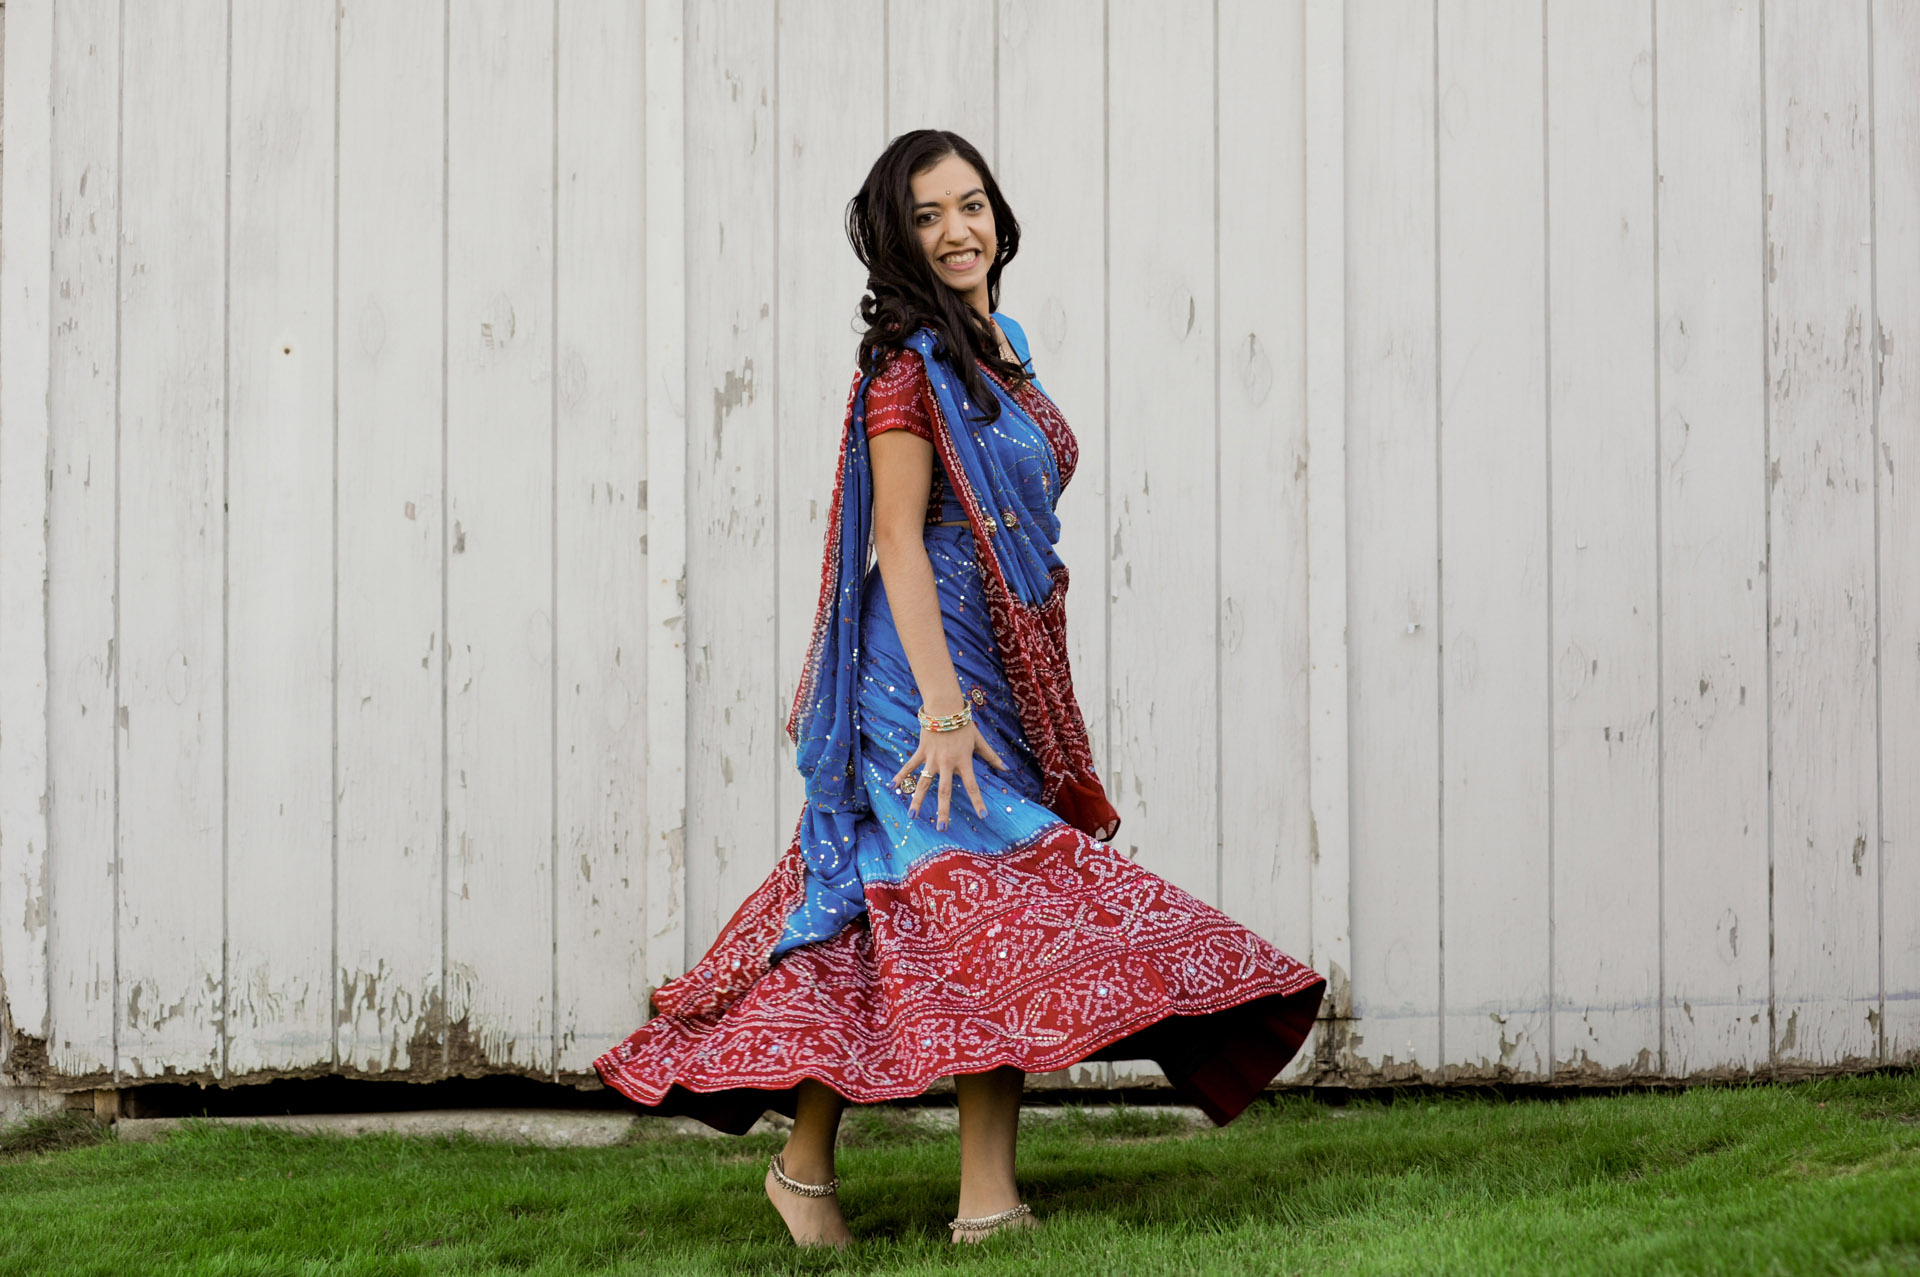 Troy, Michigan senior photographer's photo of a high school senior of her Indian dancing for her senior pictures in Troy, Michigan.